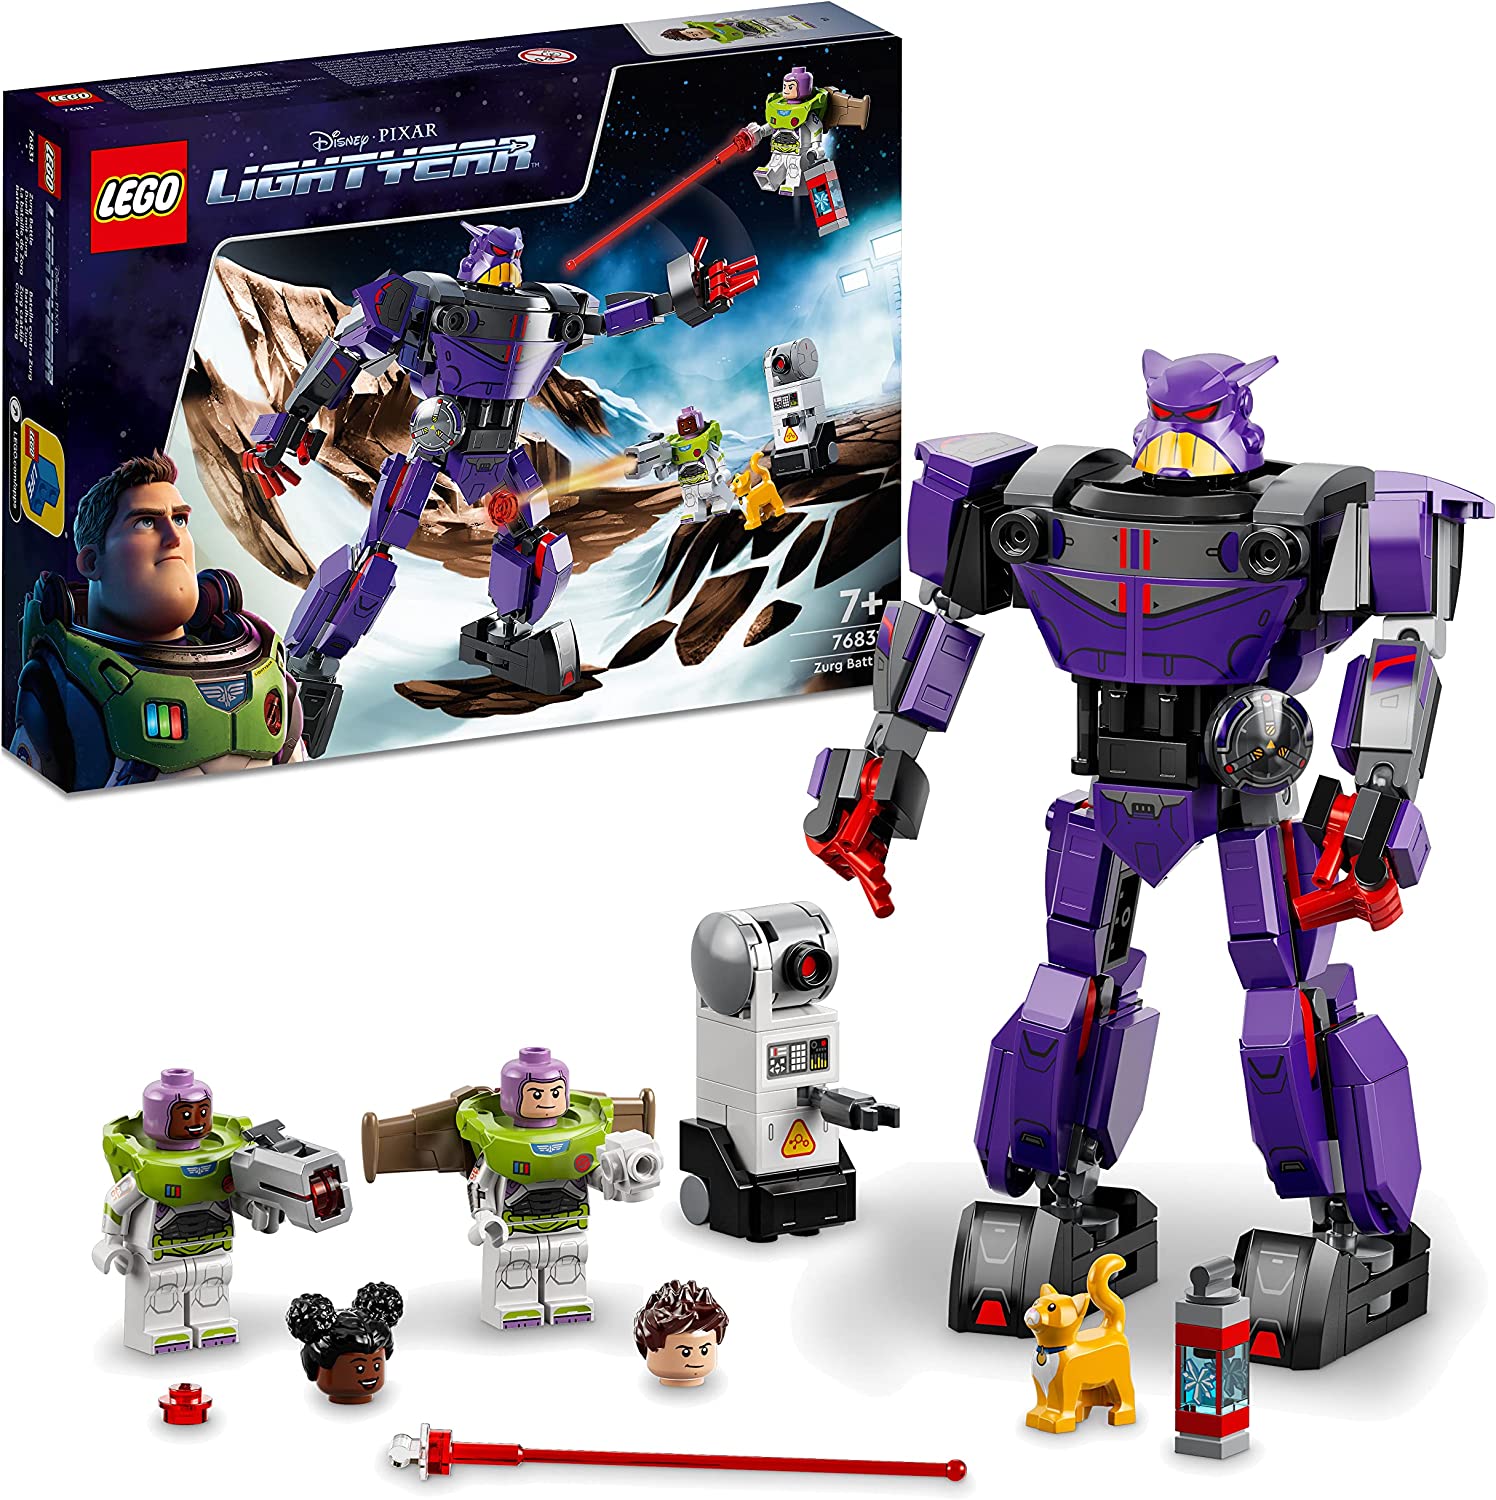 LEGO 76831 Disney and Pixar\'s Lightyear Duel with Train Space Toy for Building from 7 Years with Mech Action Figure and Buzz Mini Figure